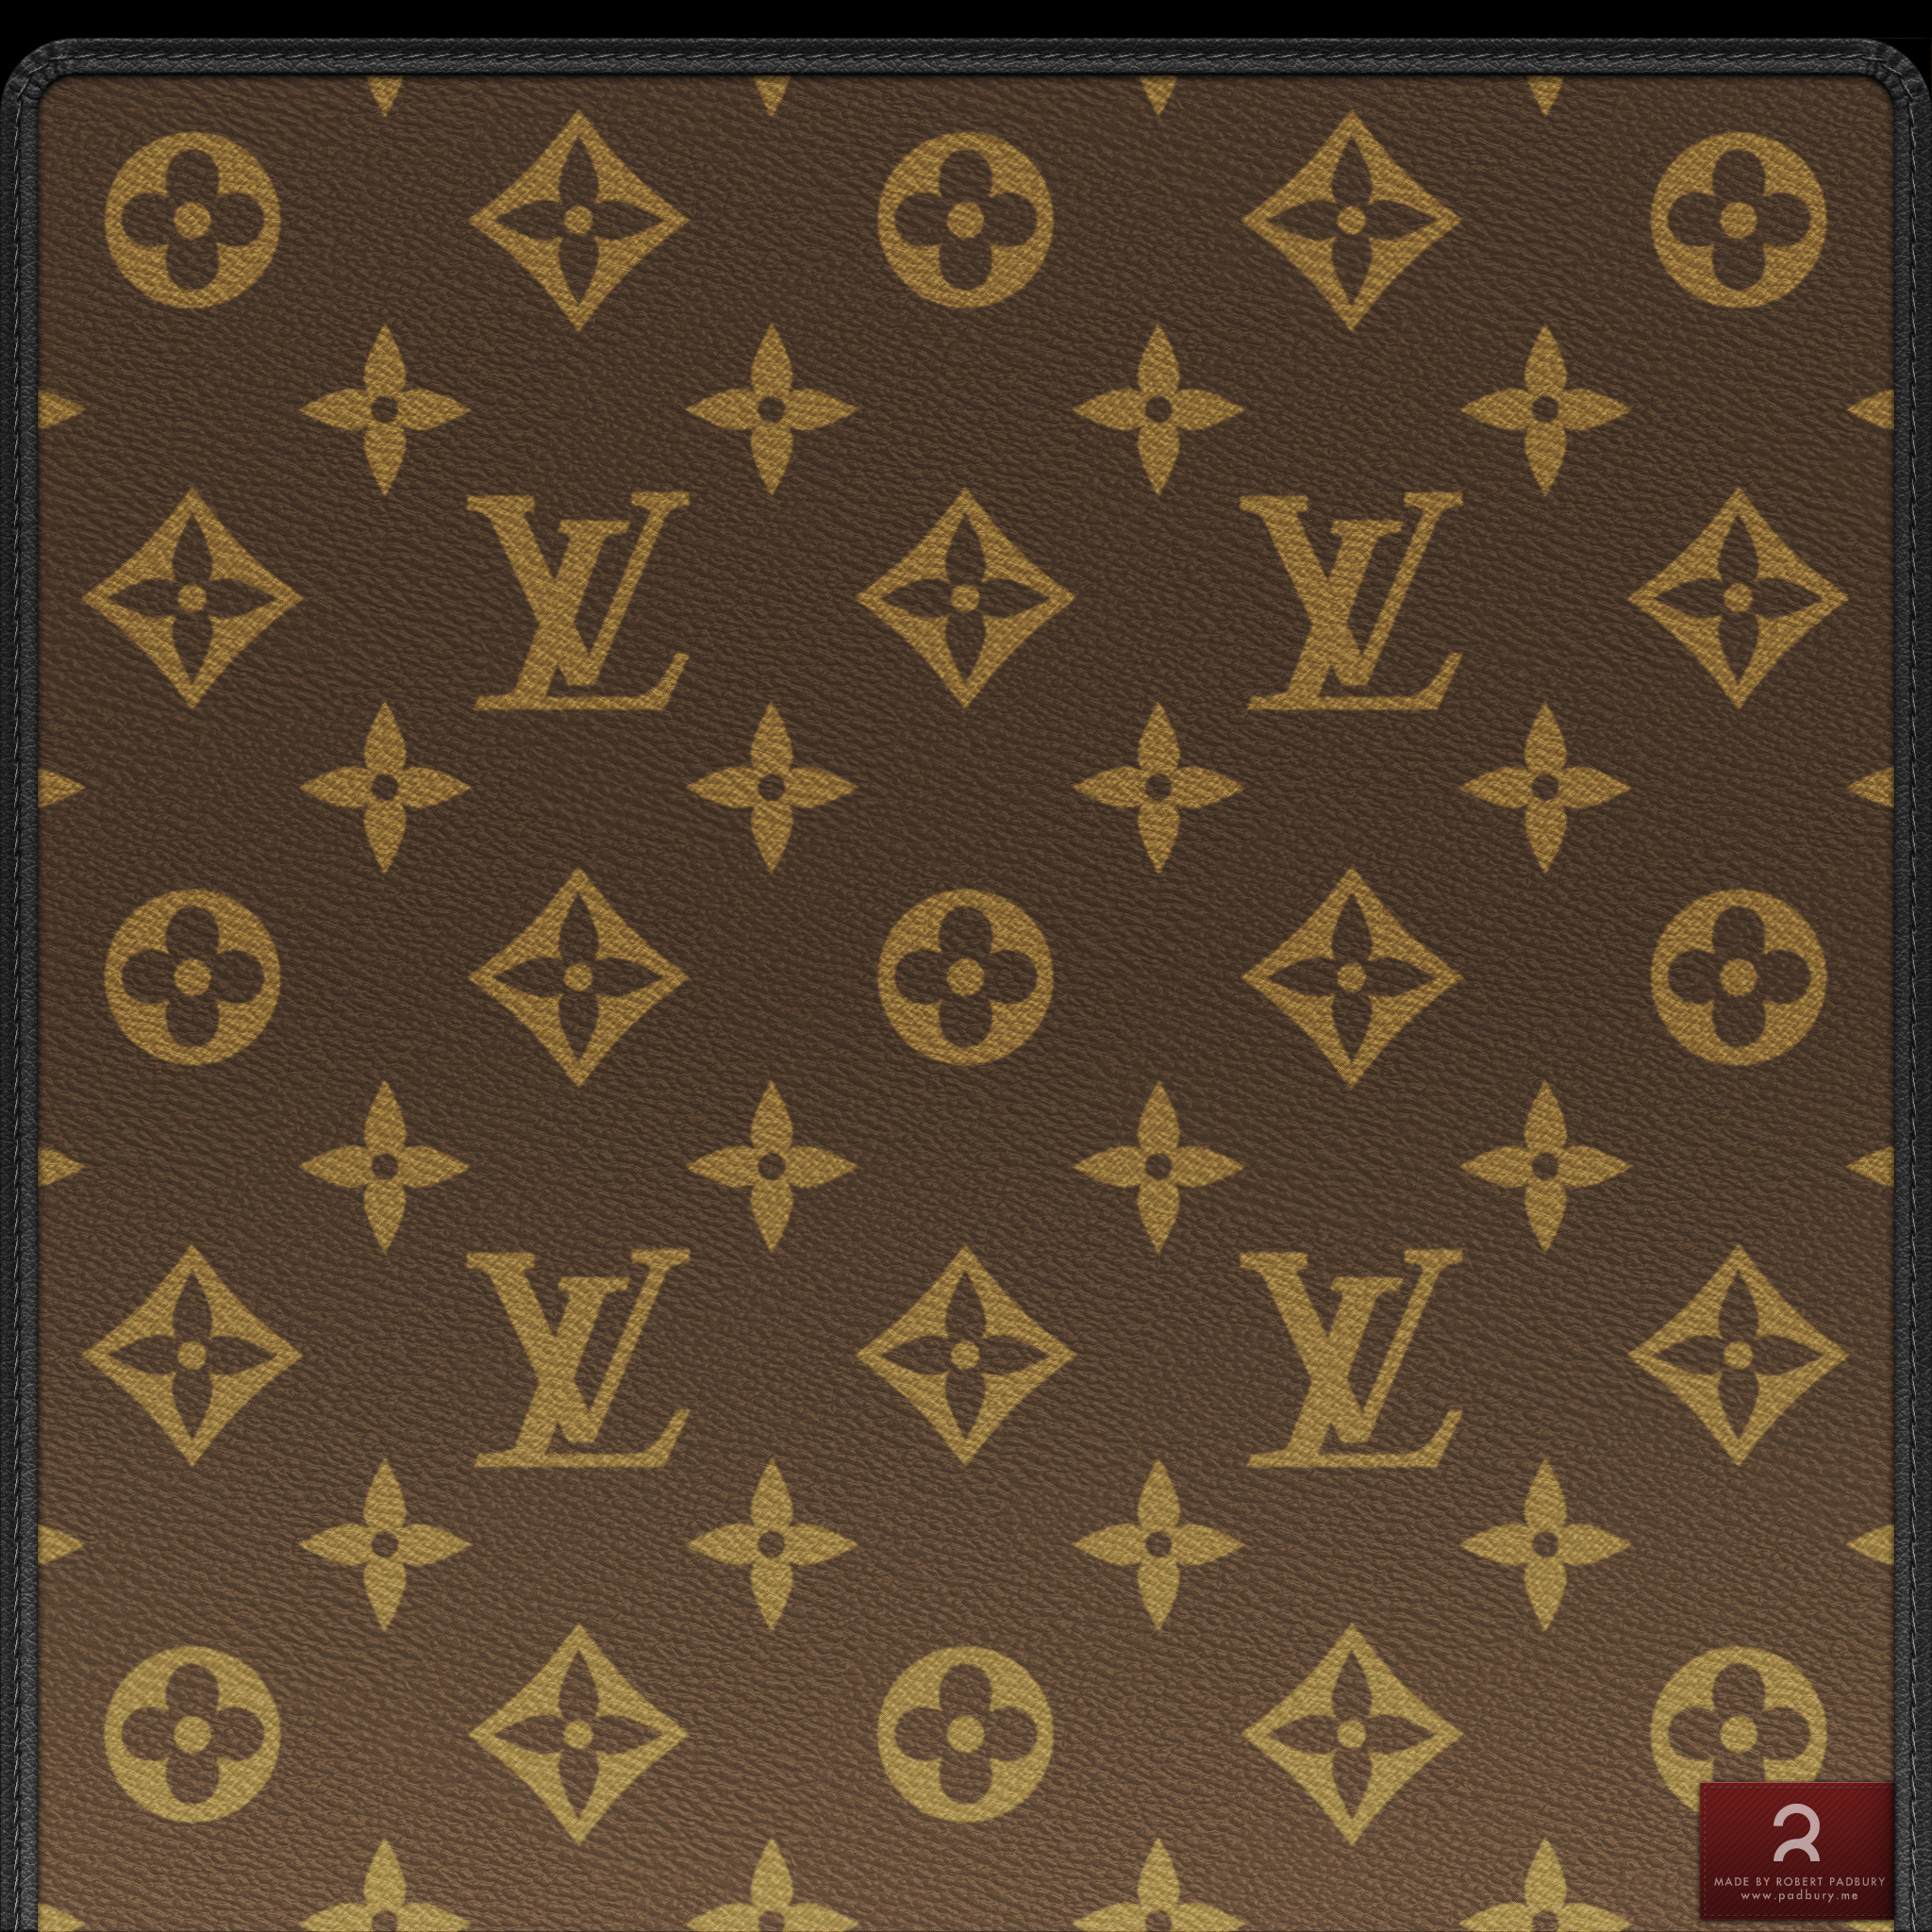 Louis Vuitton Retina Display Wallpaper Collection By